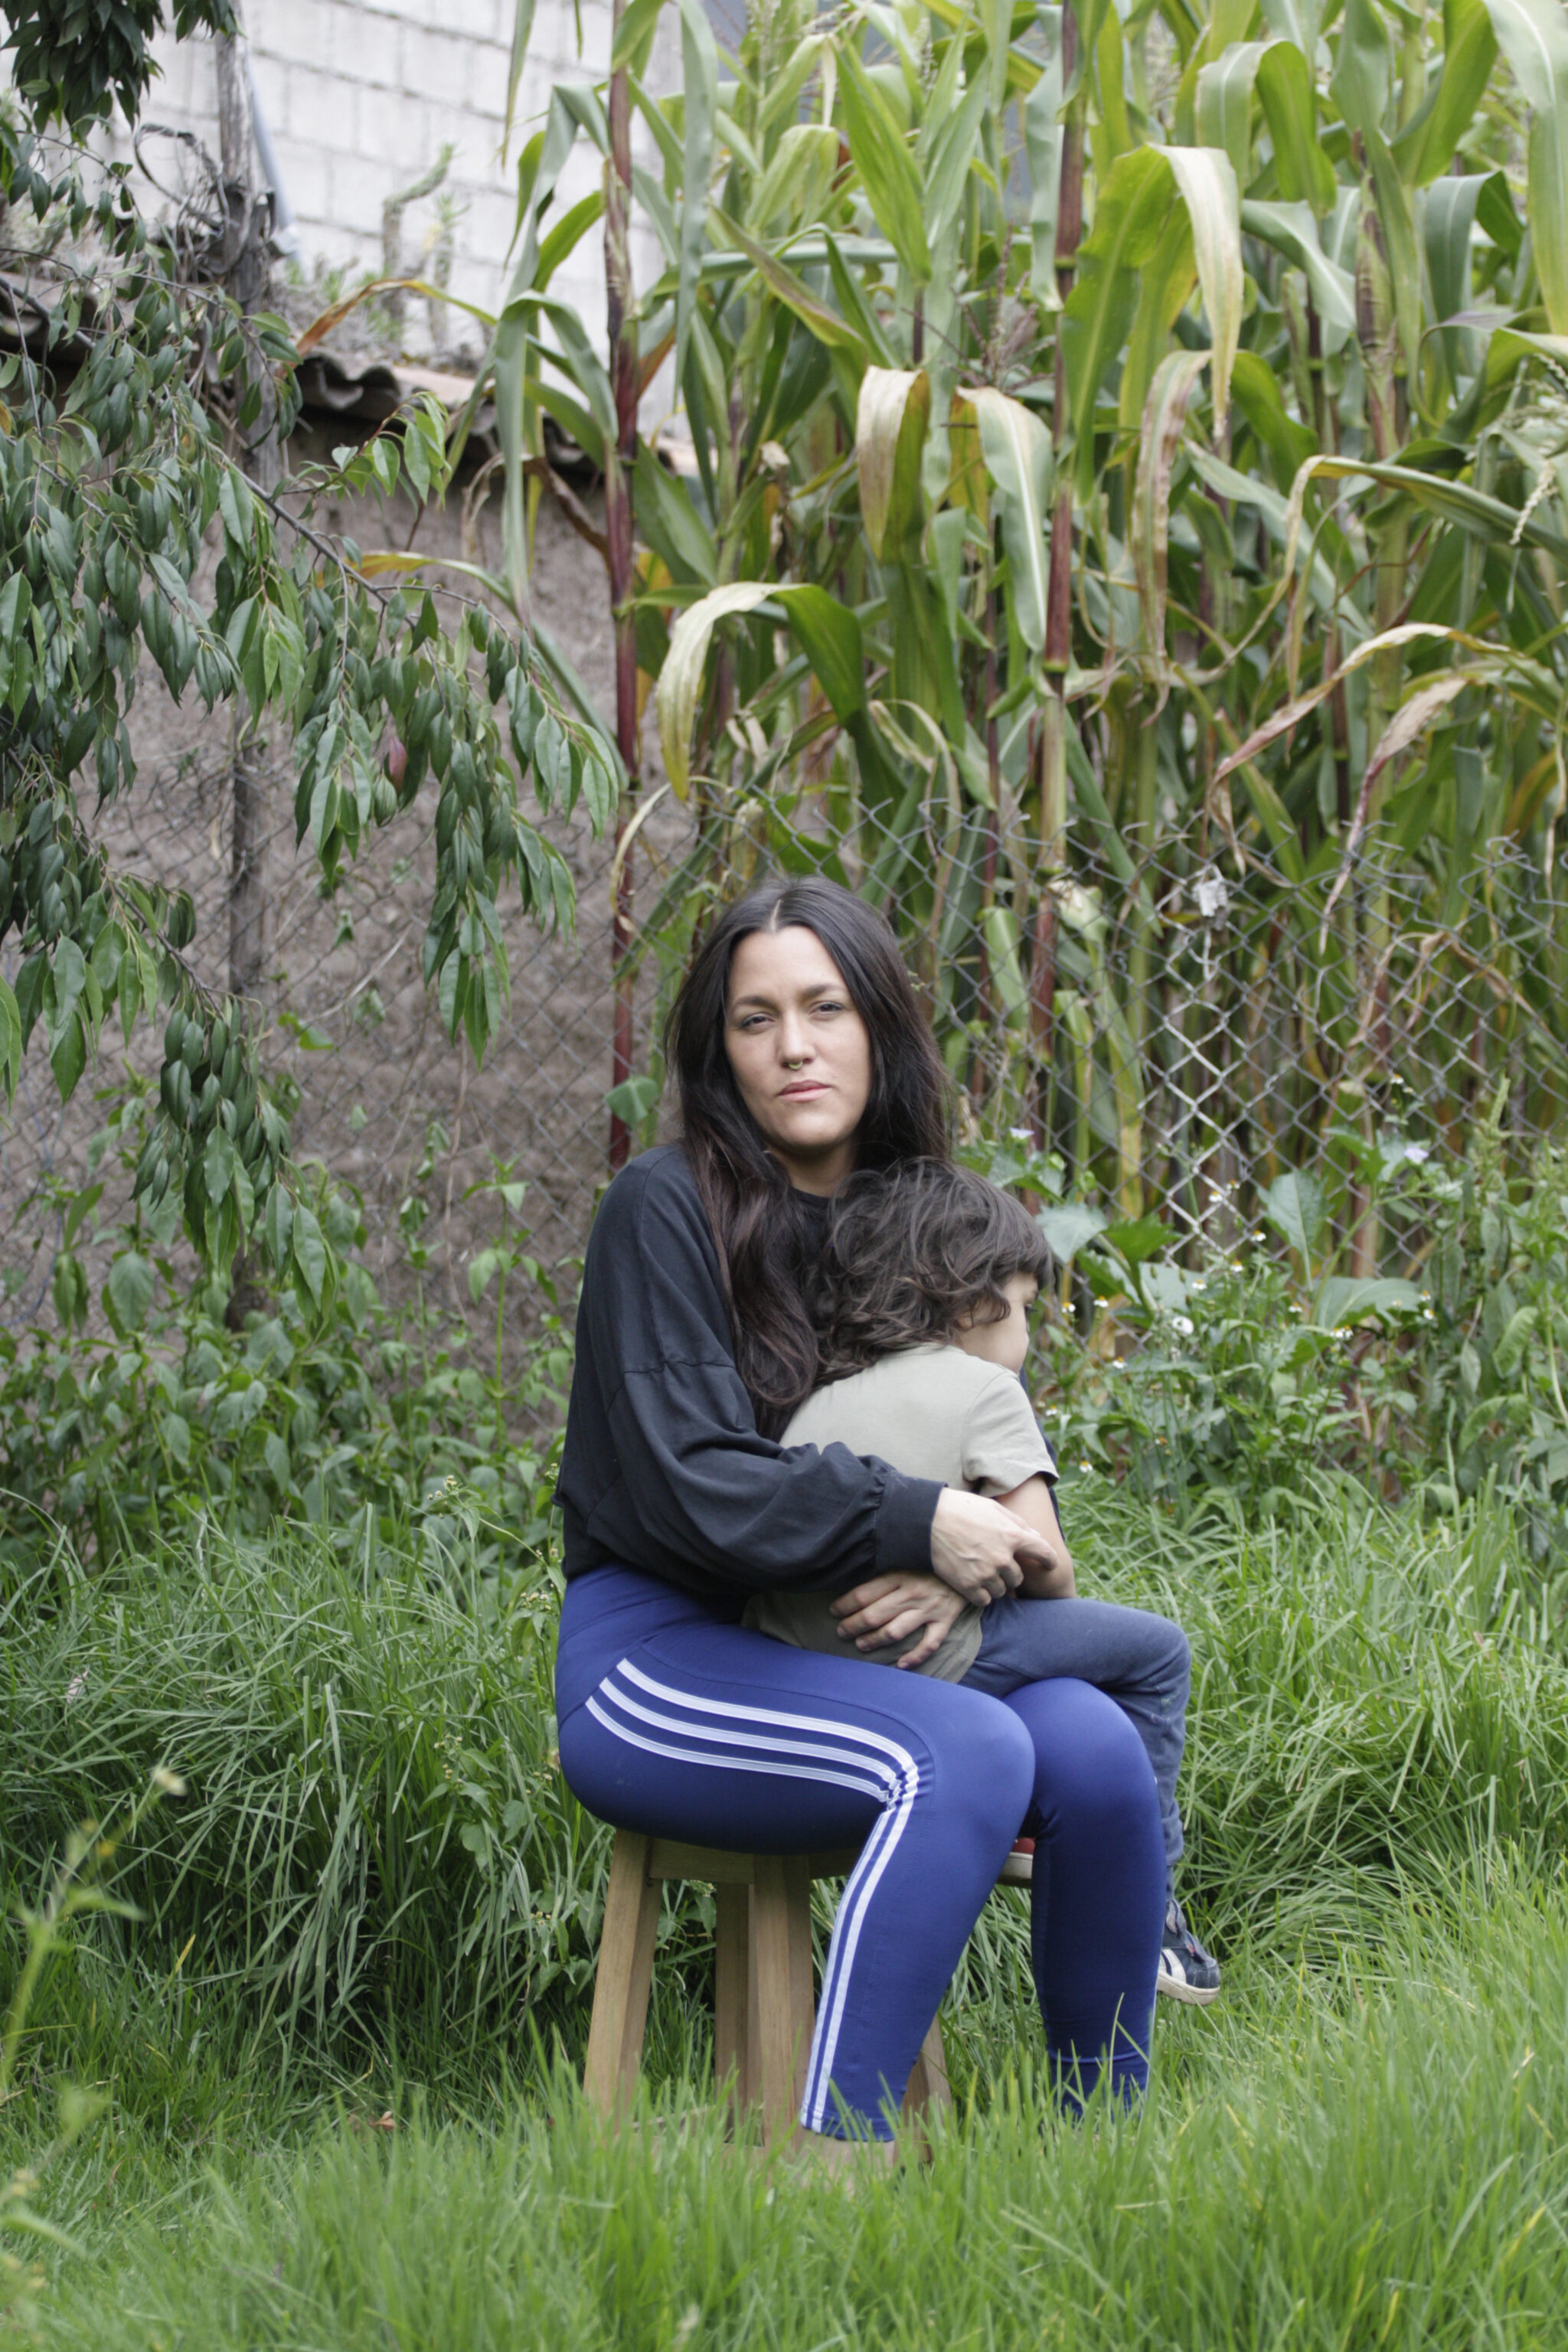 Daniella, a fair-toned woman with long black hair wears a black top and blue sweatpants with white stripes on the side, sits on a wooden stool in a garden, while holding a toddler.